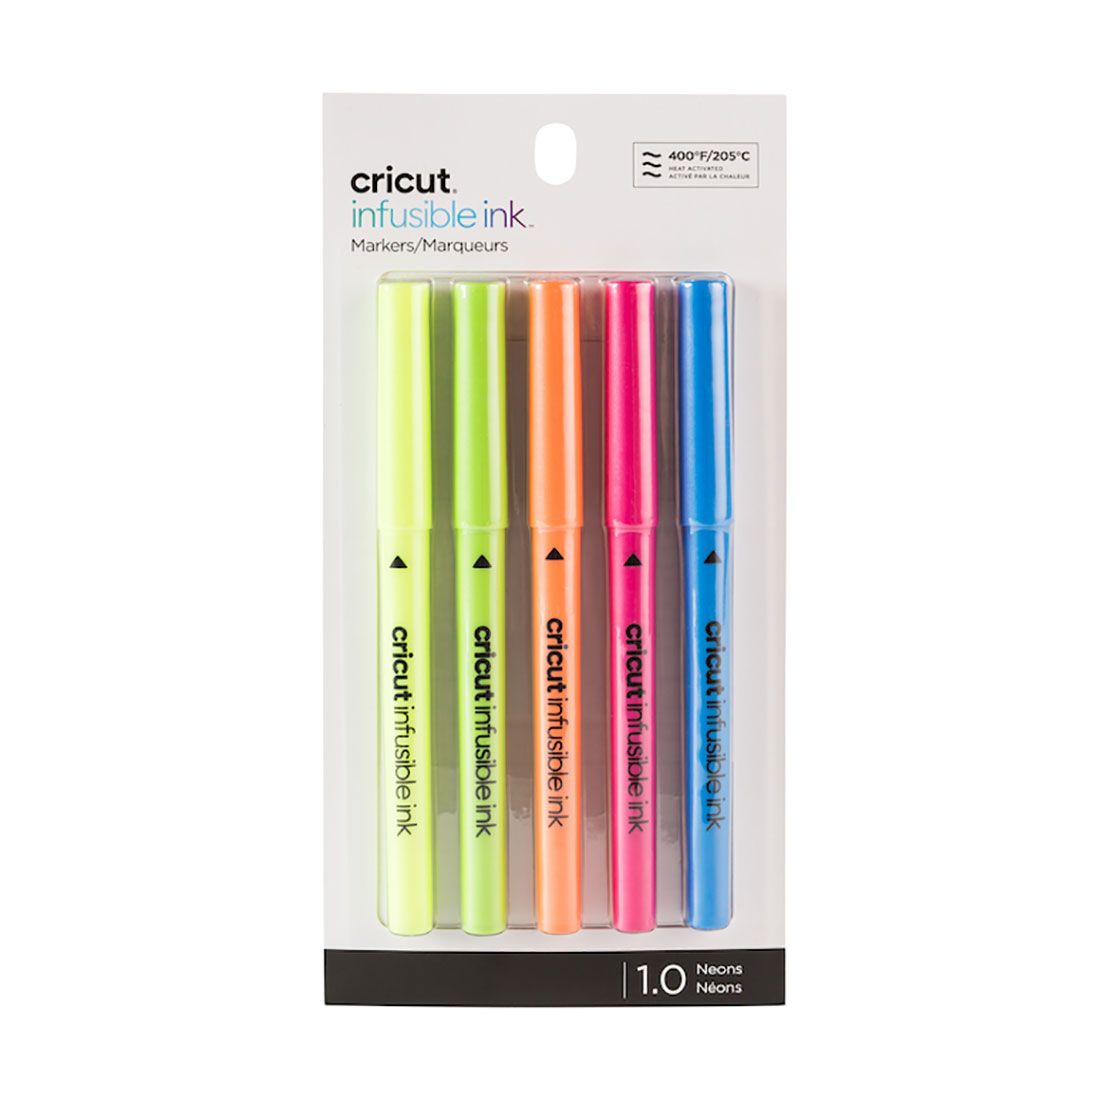 Cricut: Explore Maker Infusible Ink - Markers (1.0), Neons (5 ct)